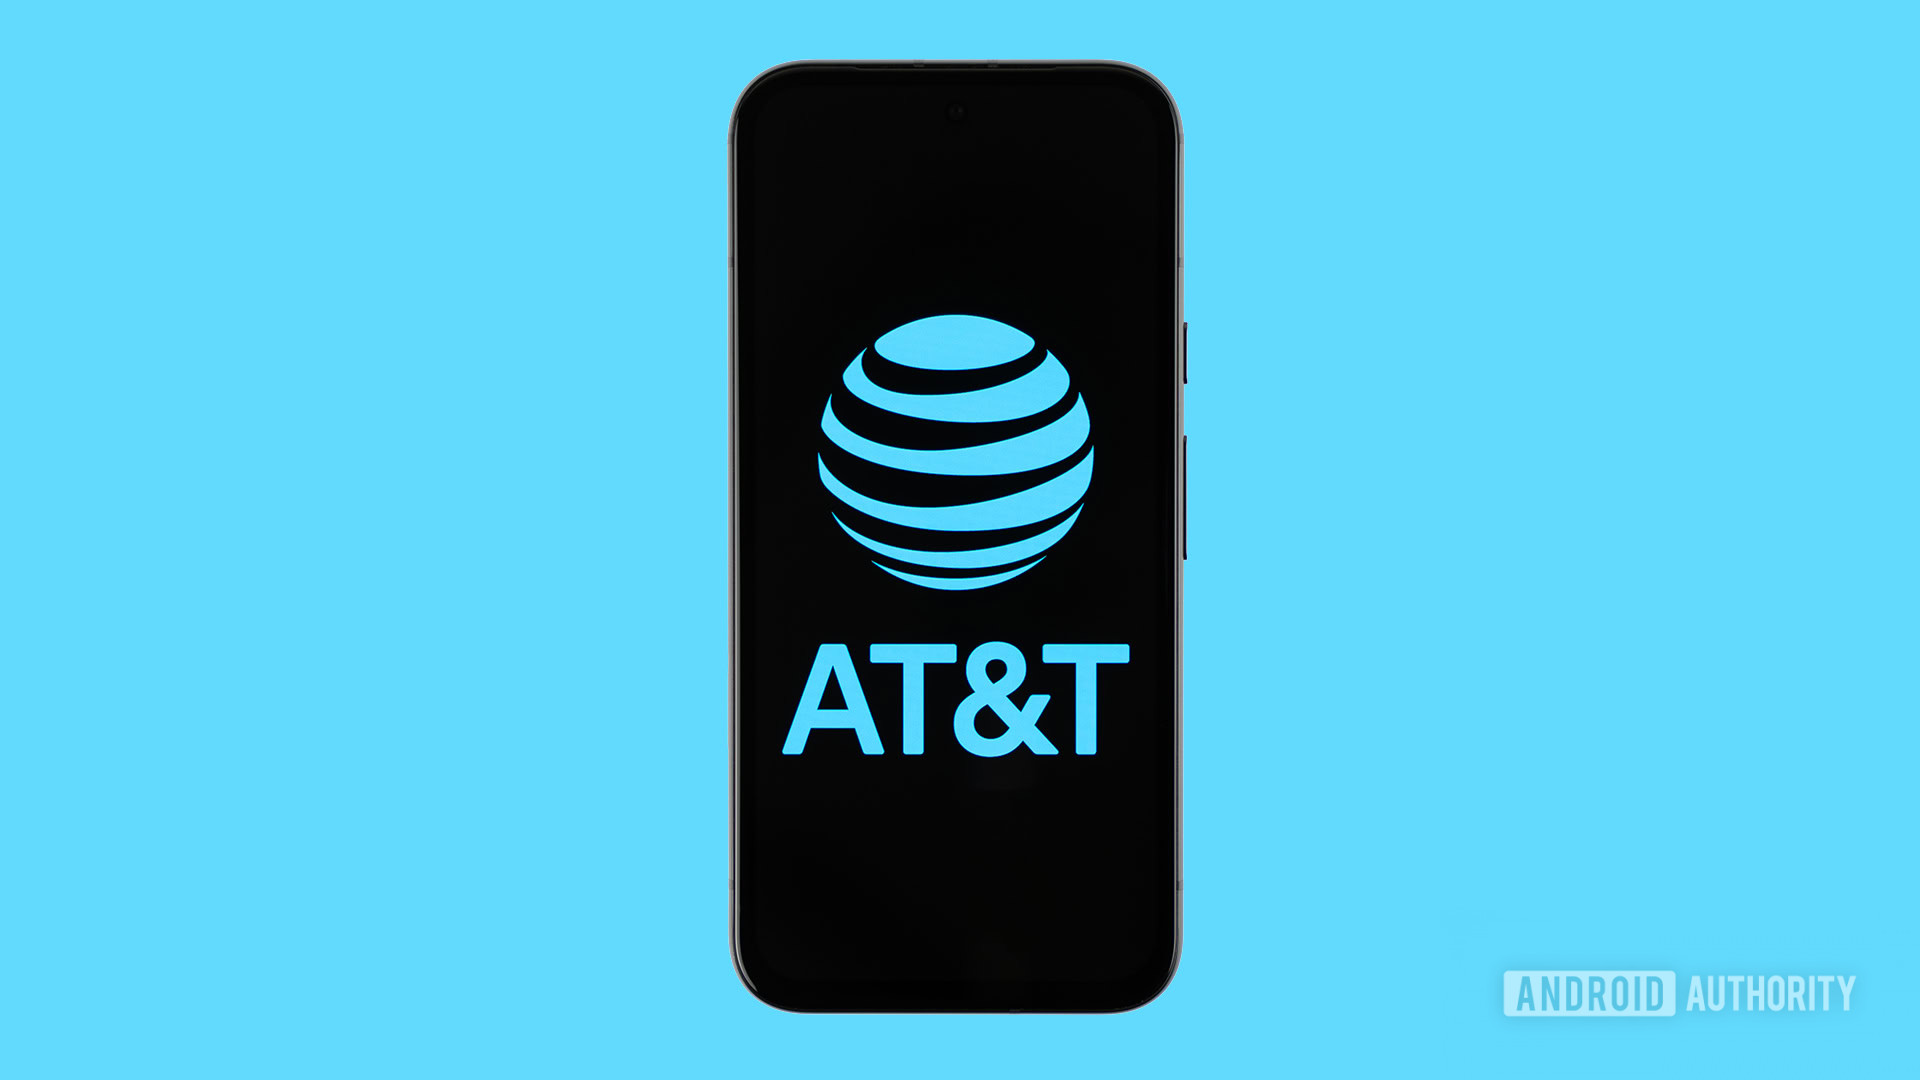 AT&amp;T logo on smartphone with blue background stock photo